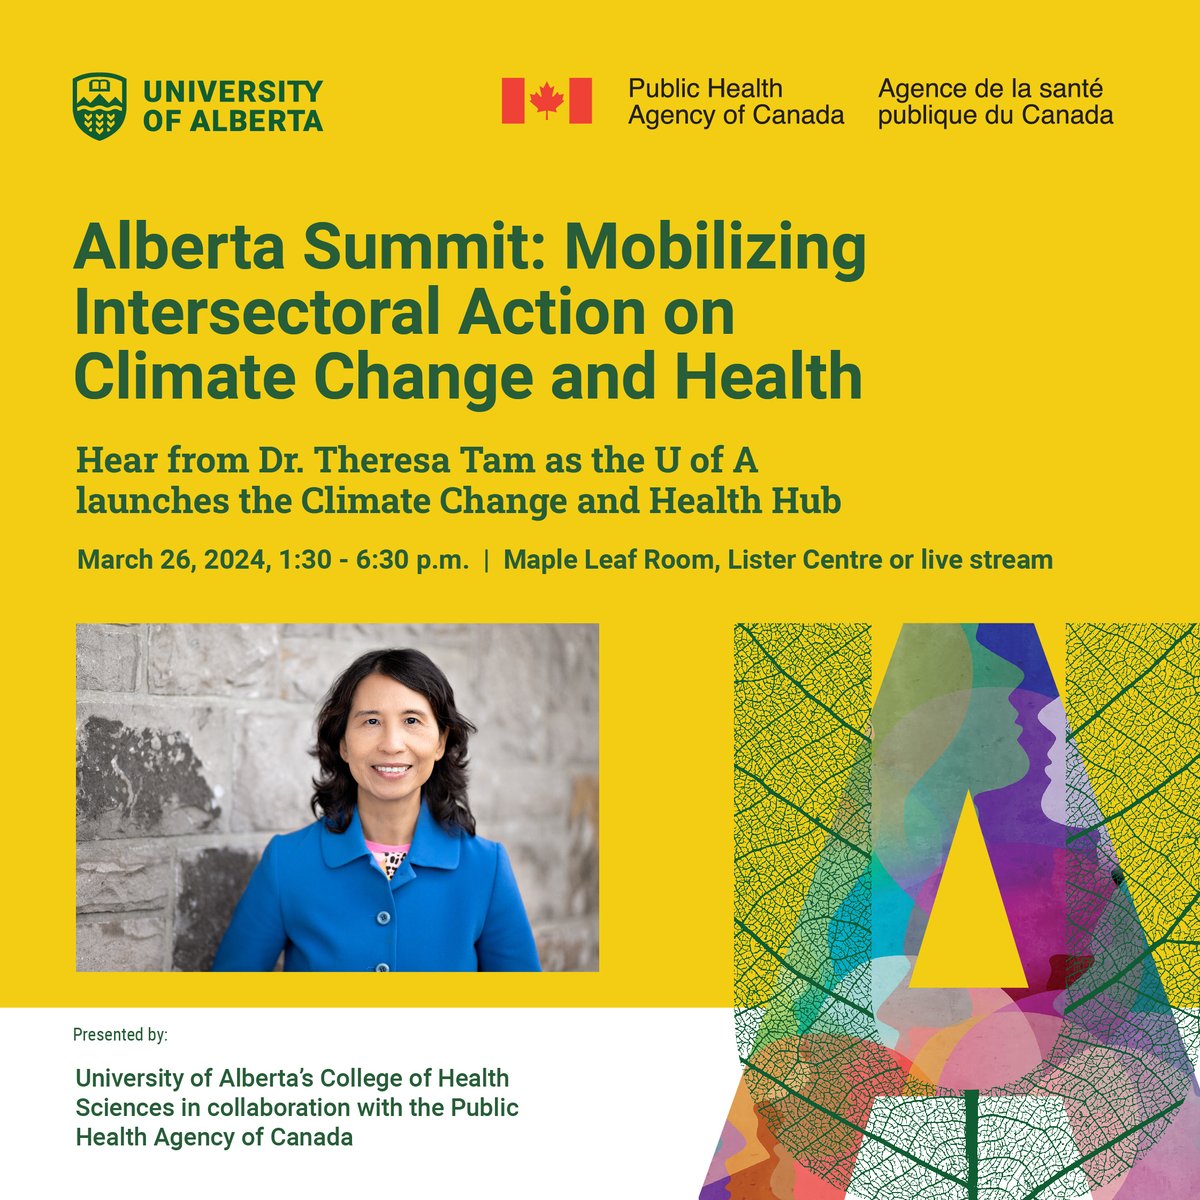 Dr. Theresa Tam will be joining us (virtually) for the launch of the Climate Change and Health Hub. Happening tomorrow! Don't miss out. Learn more & register: bit.ly/3va7hG5